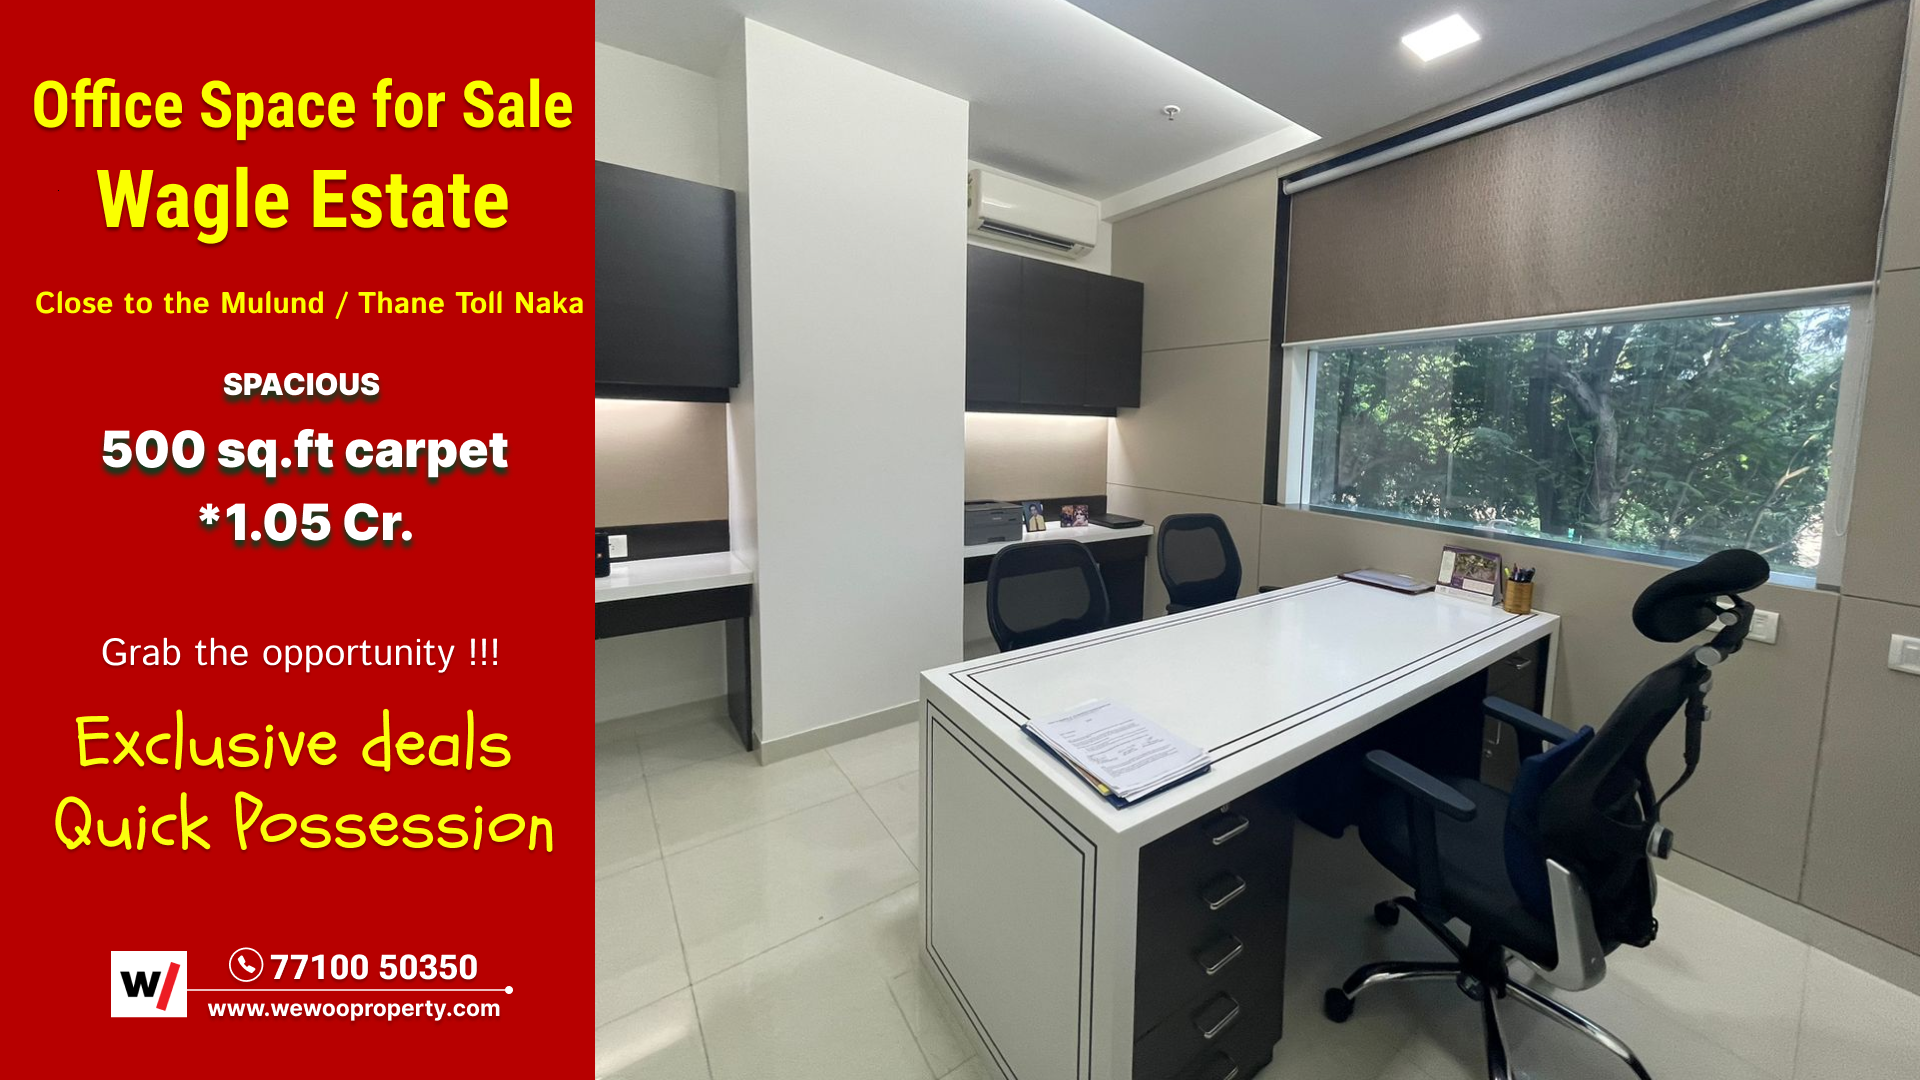 Office Spaces in Wagle Estate for Sale